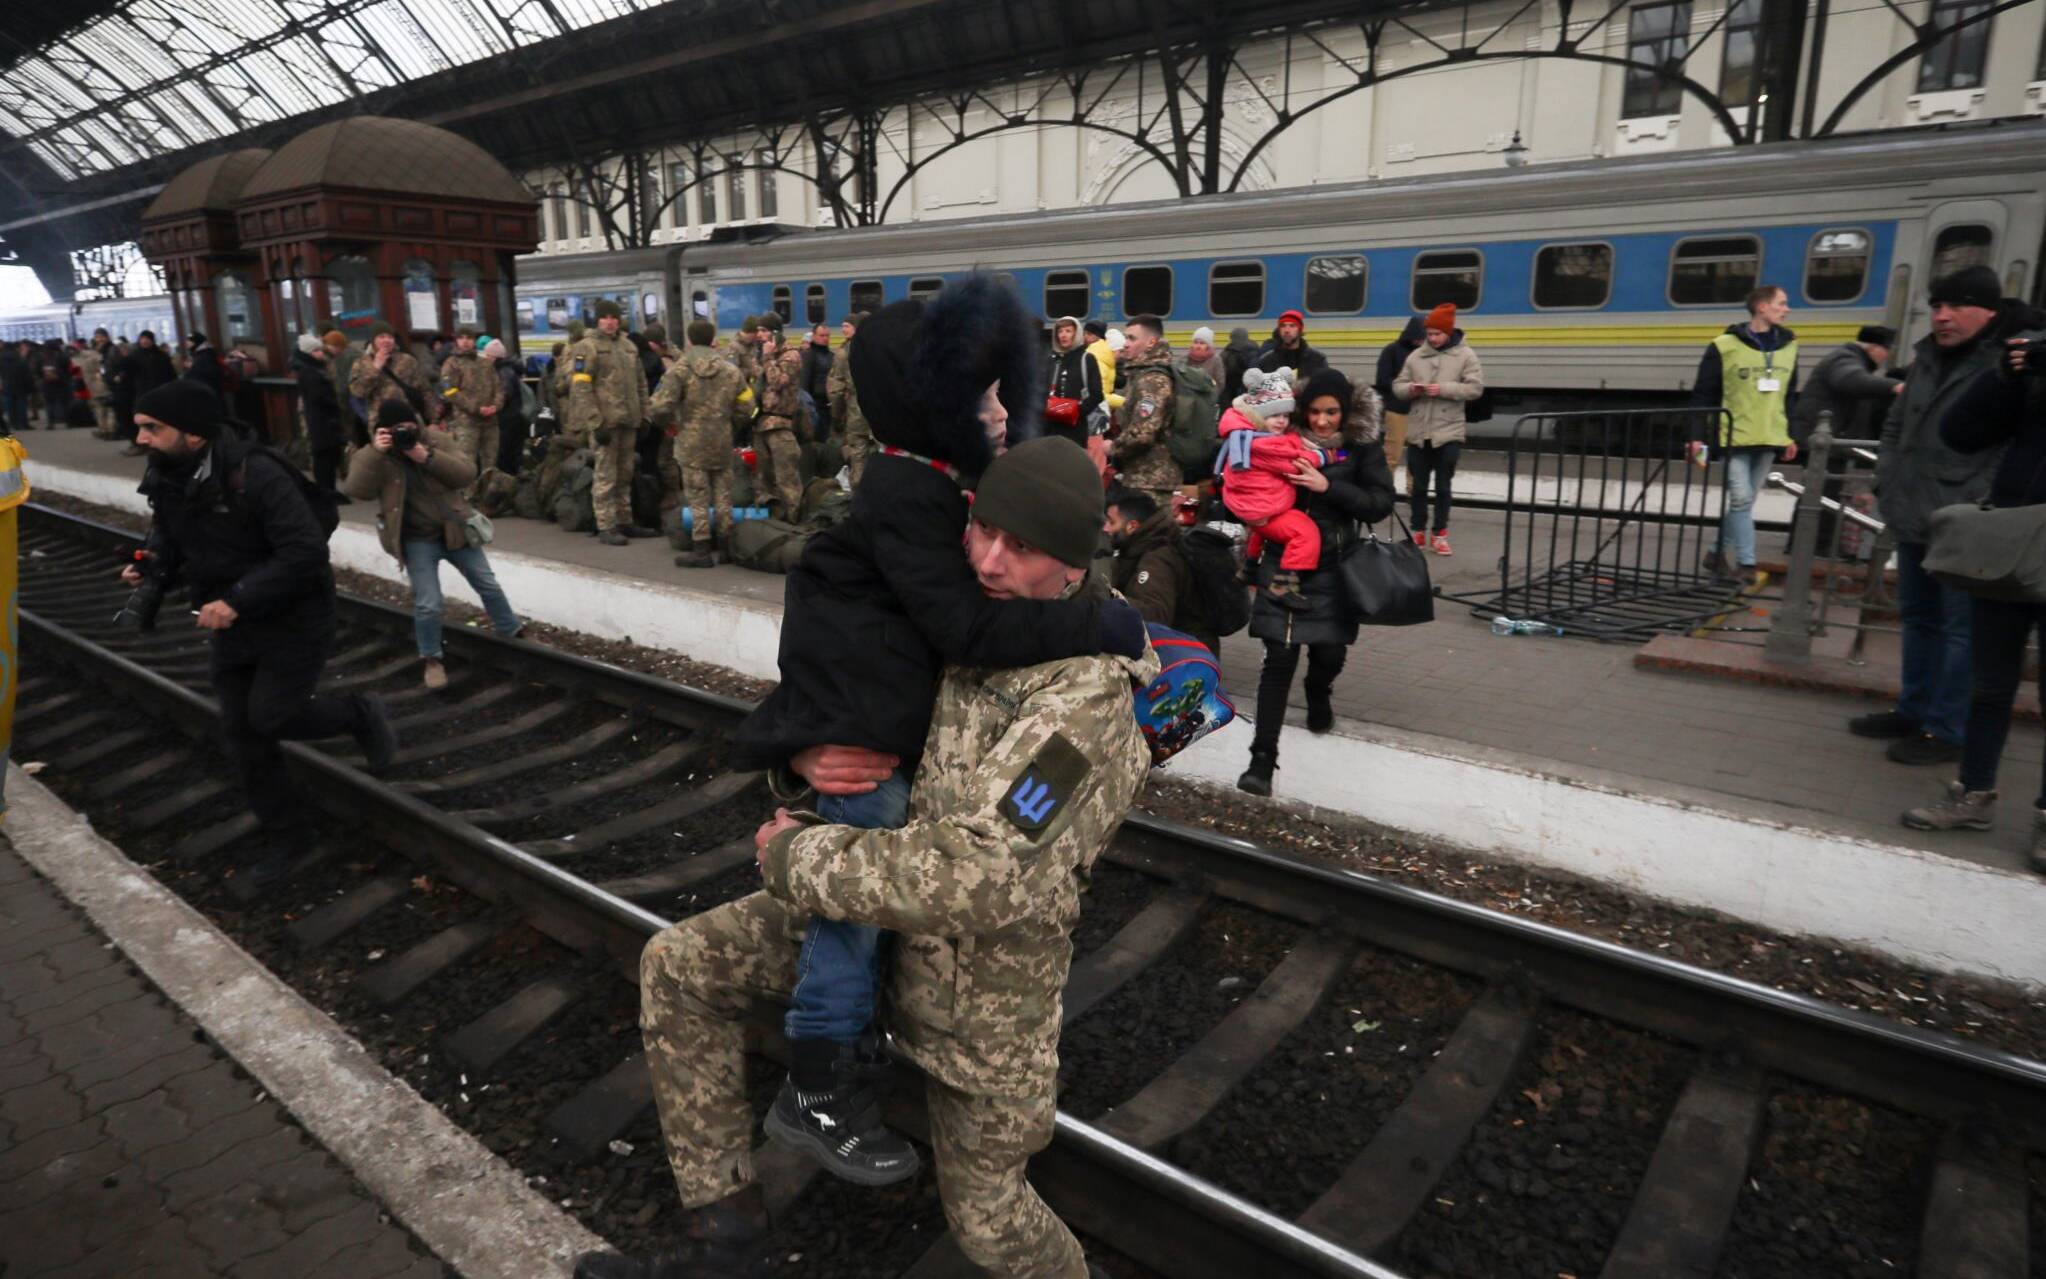 Ukrainian servicemen get ready to depart in the direction of Kyiv at the central train station in the western Ukrainian city of Lviv on March 9, 2022, amid the ongoing Russia's invasion of Ukraine. (Photo by Aleksey Filippov / AFP)